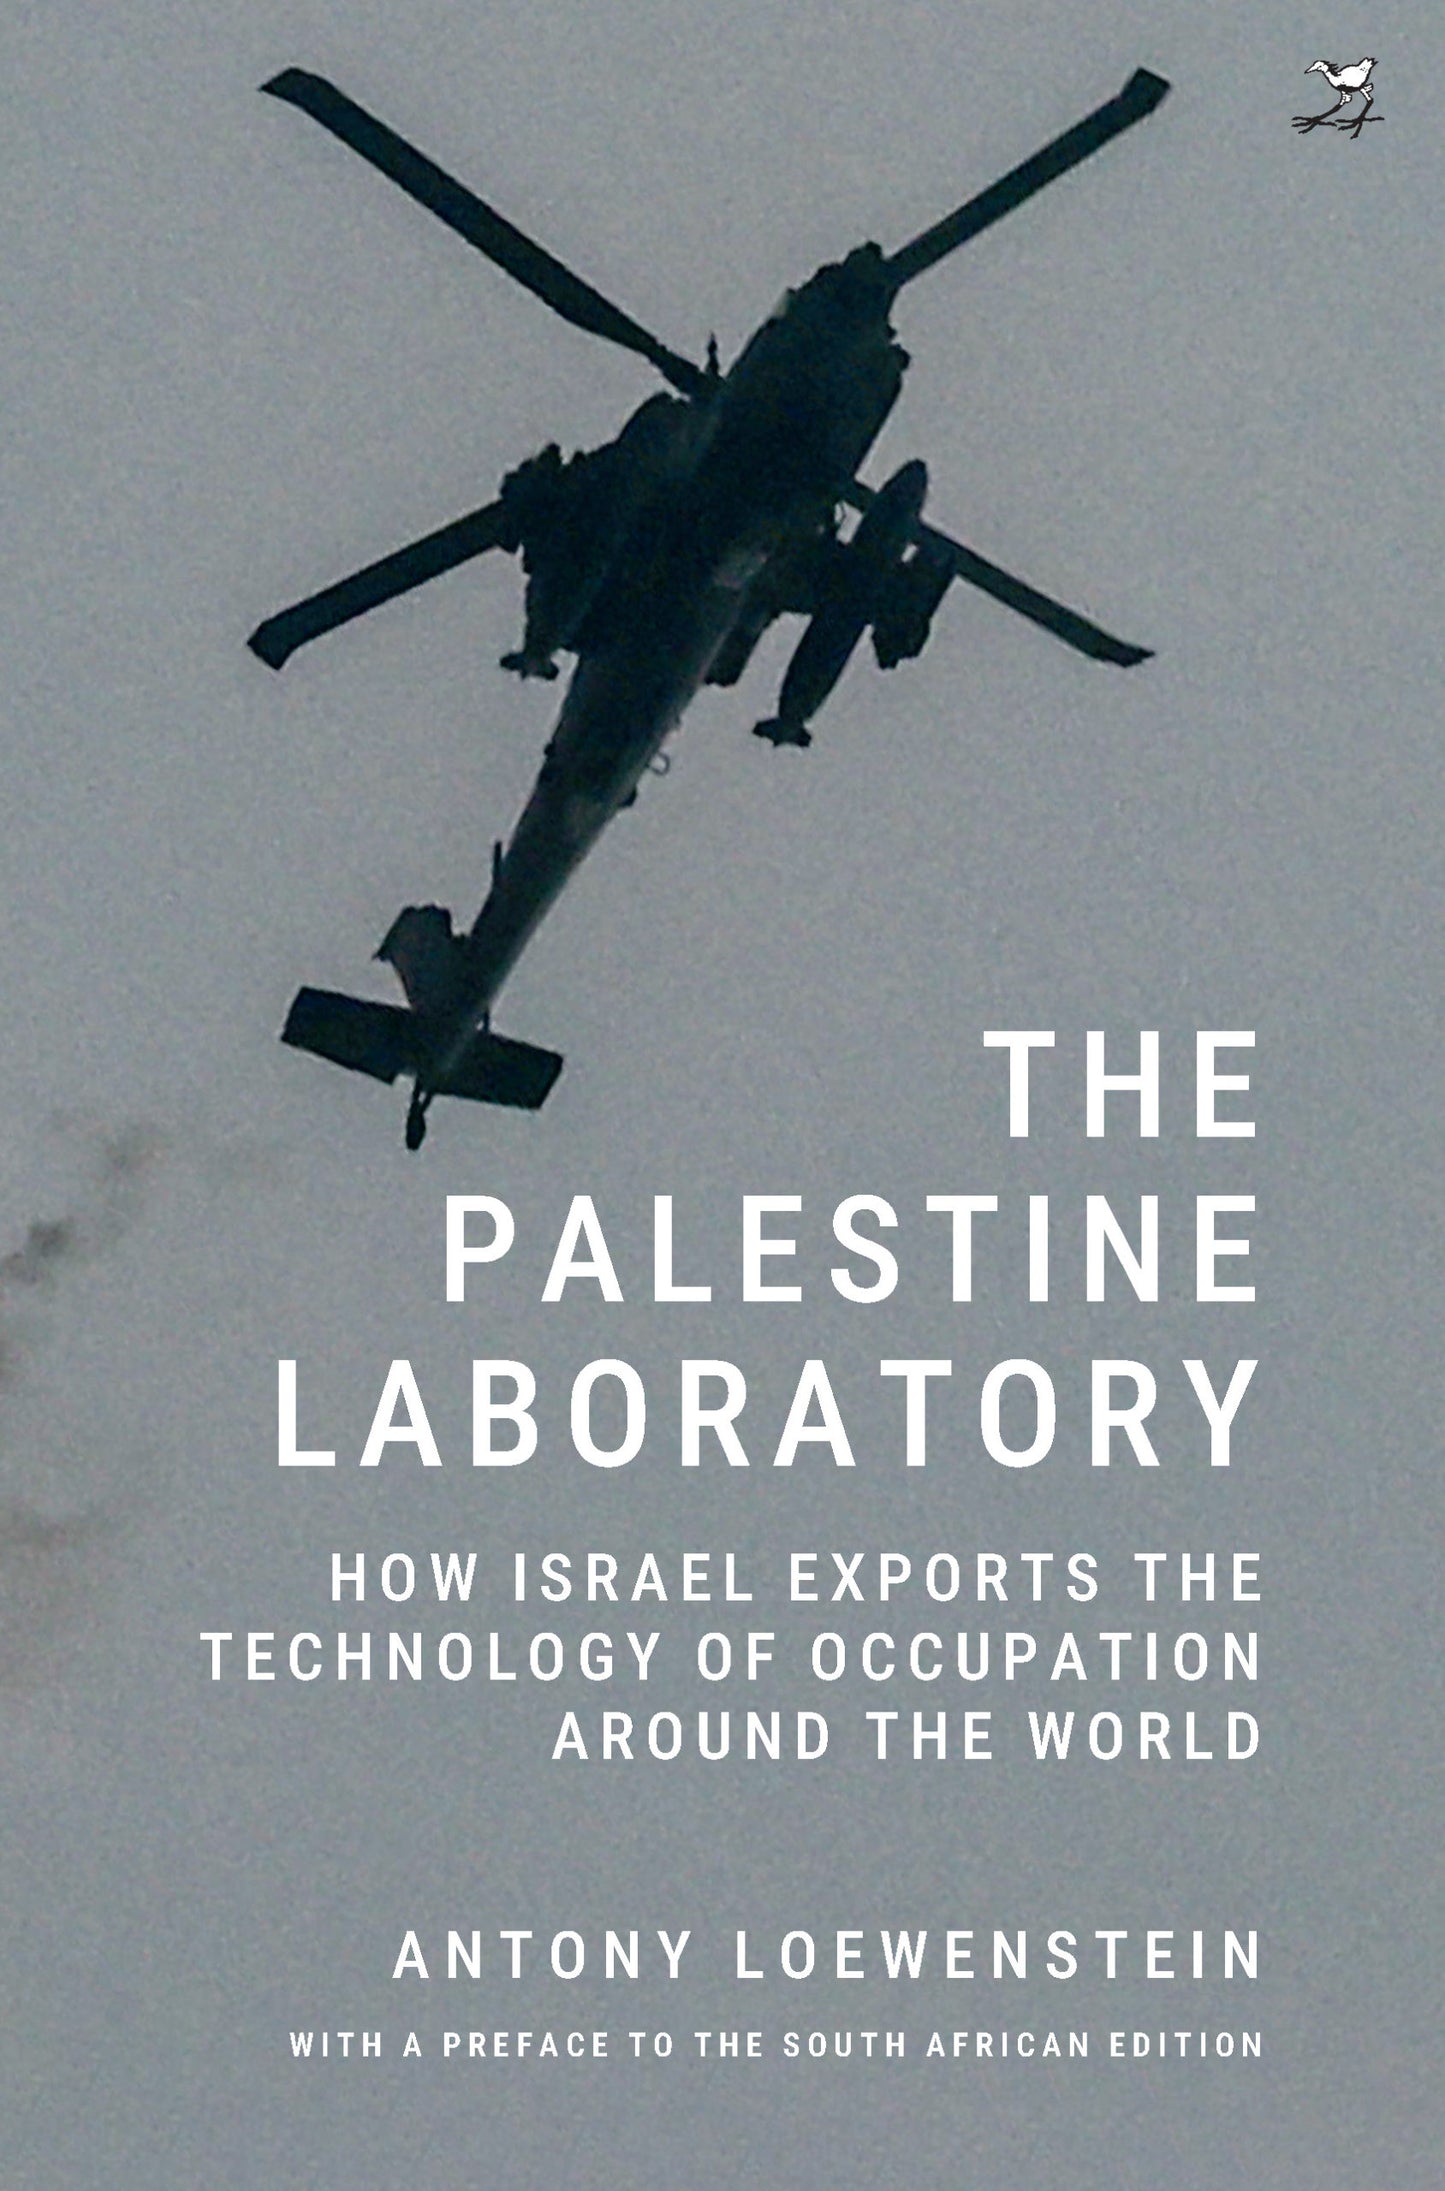 The Palestine Laboratory: How Israel Exports the Technology of Occupation around the World, by Antony Loewenstein